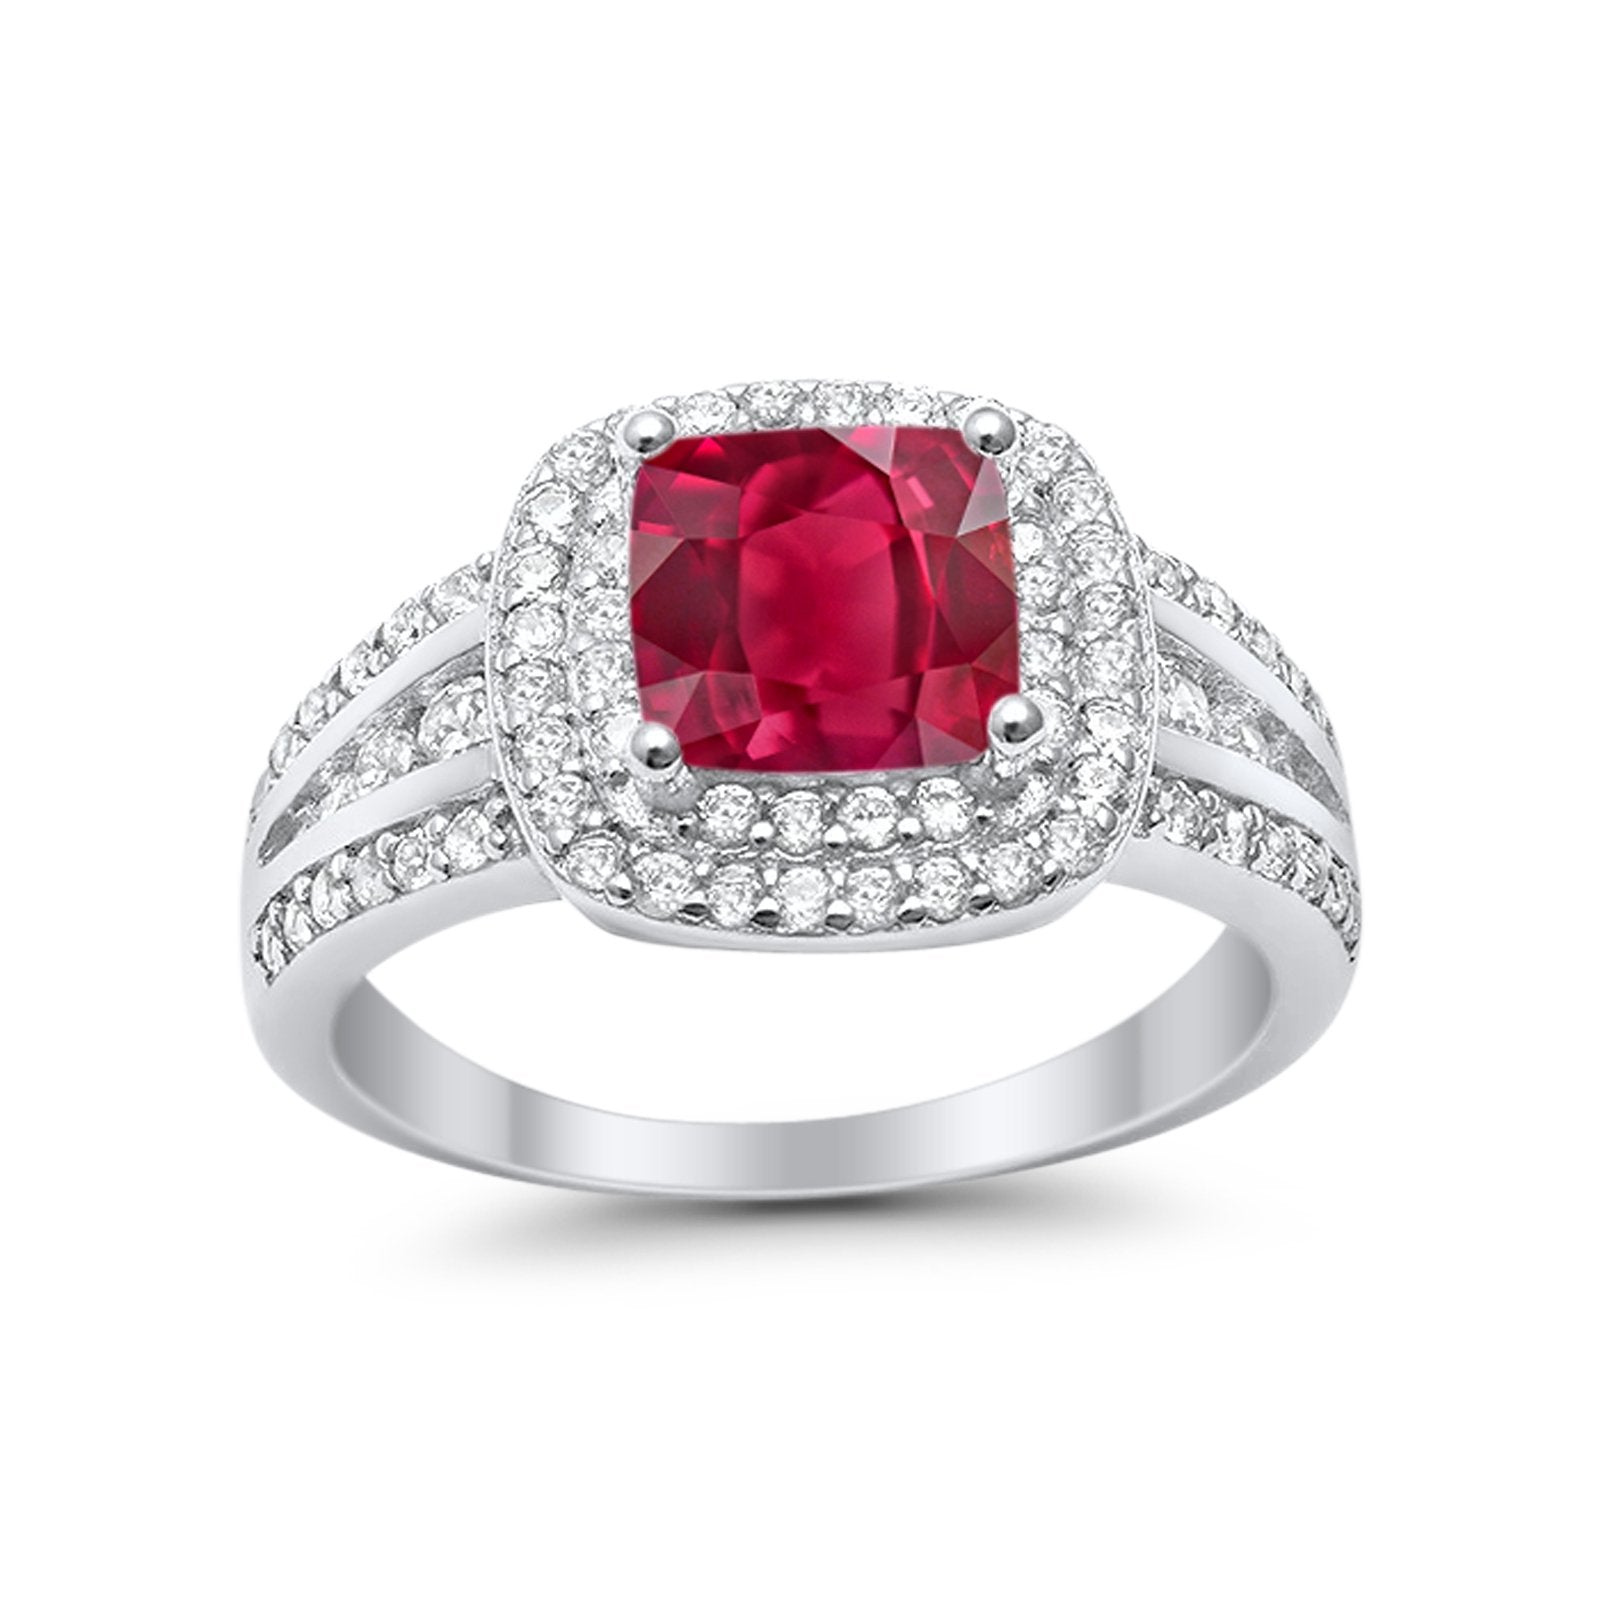 Halo Art Deco Wedding Ring Princess Cut Round Simulated Ruby CZ 925 Sterling Silver